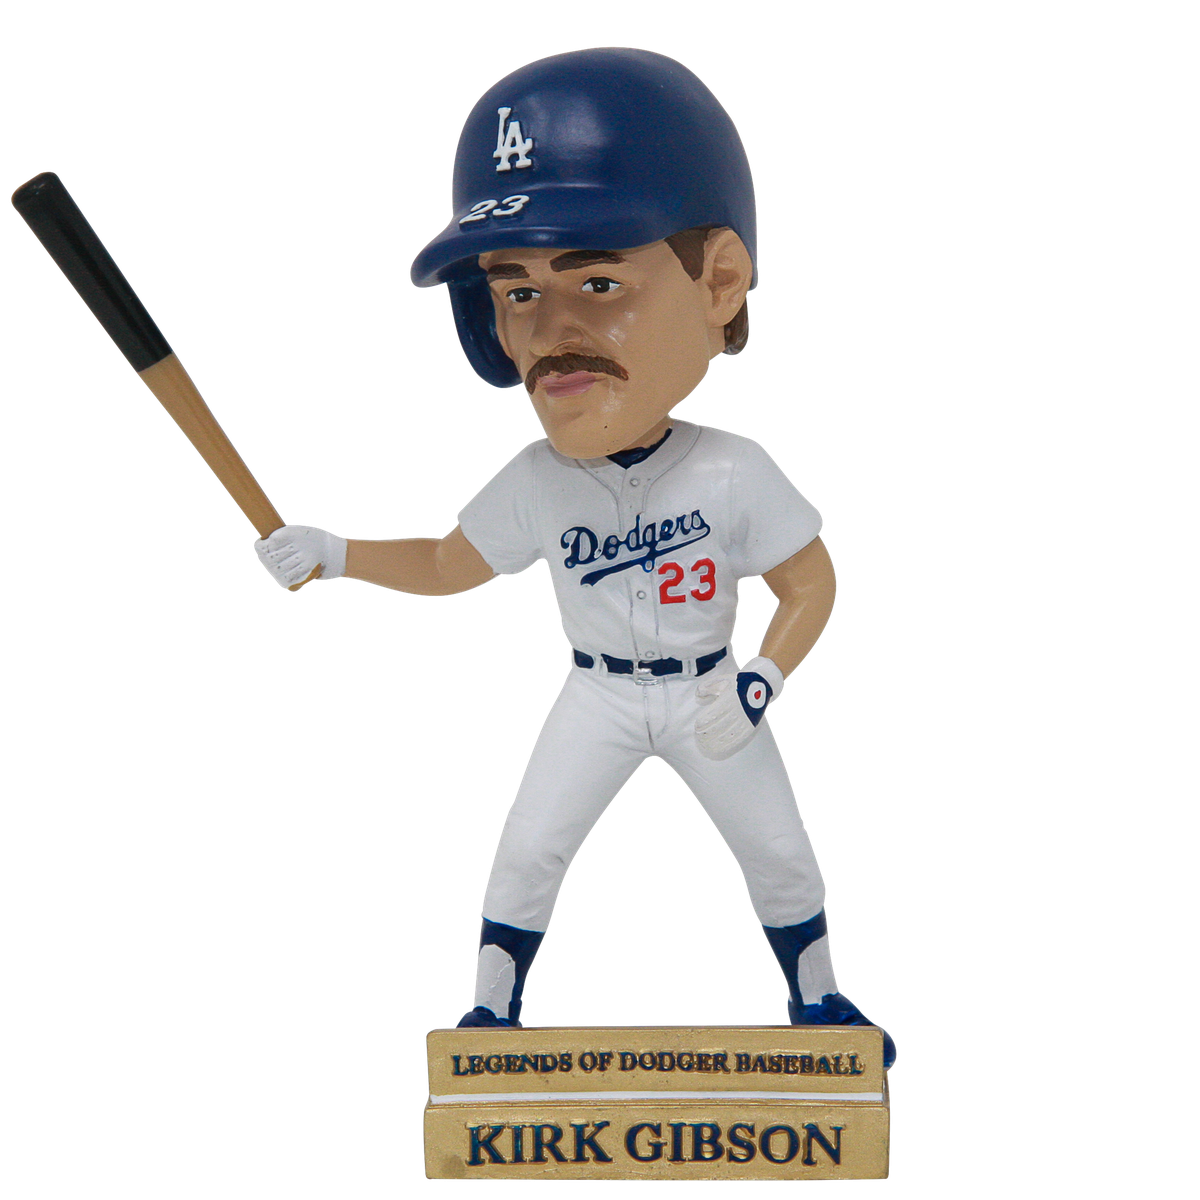 The first 40,000 fans at Dodger Stadium on Saturday will receive this Kirk Gibson bobblehead.